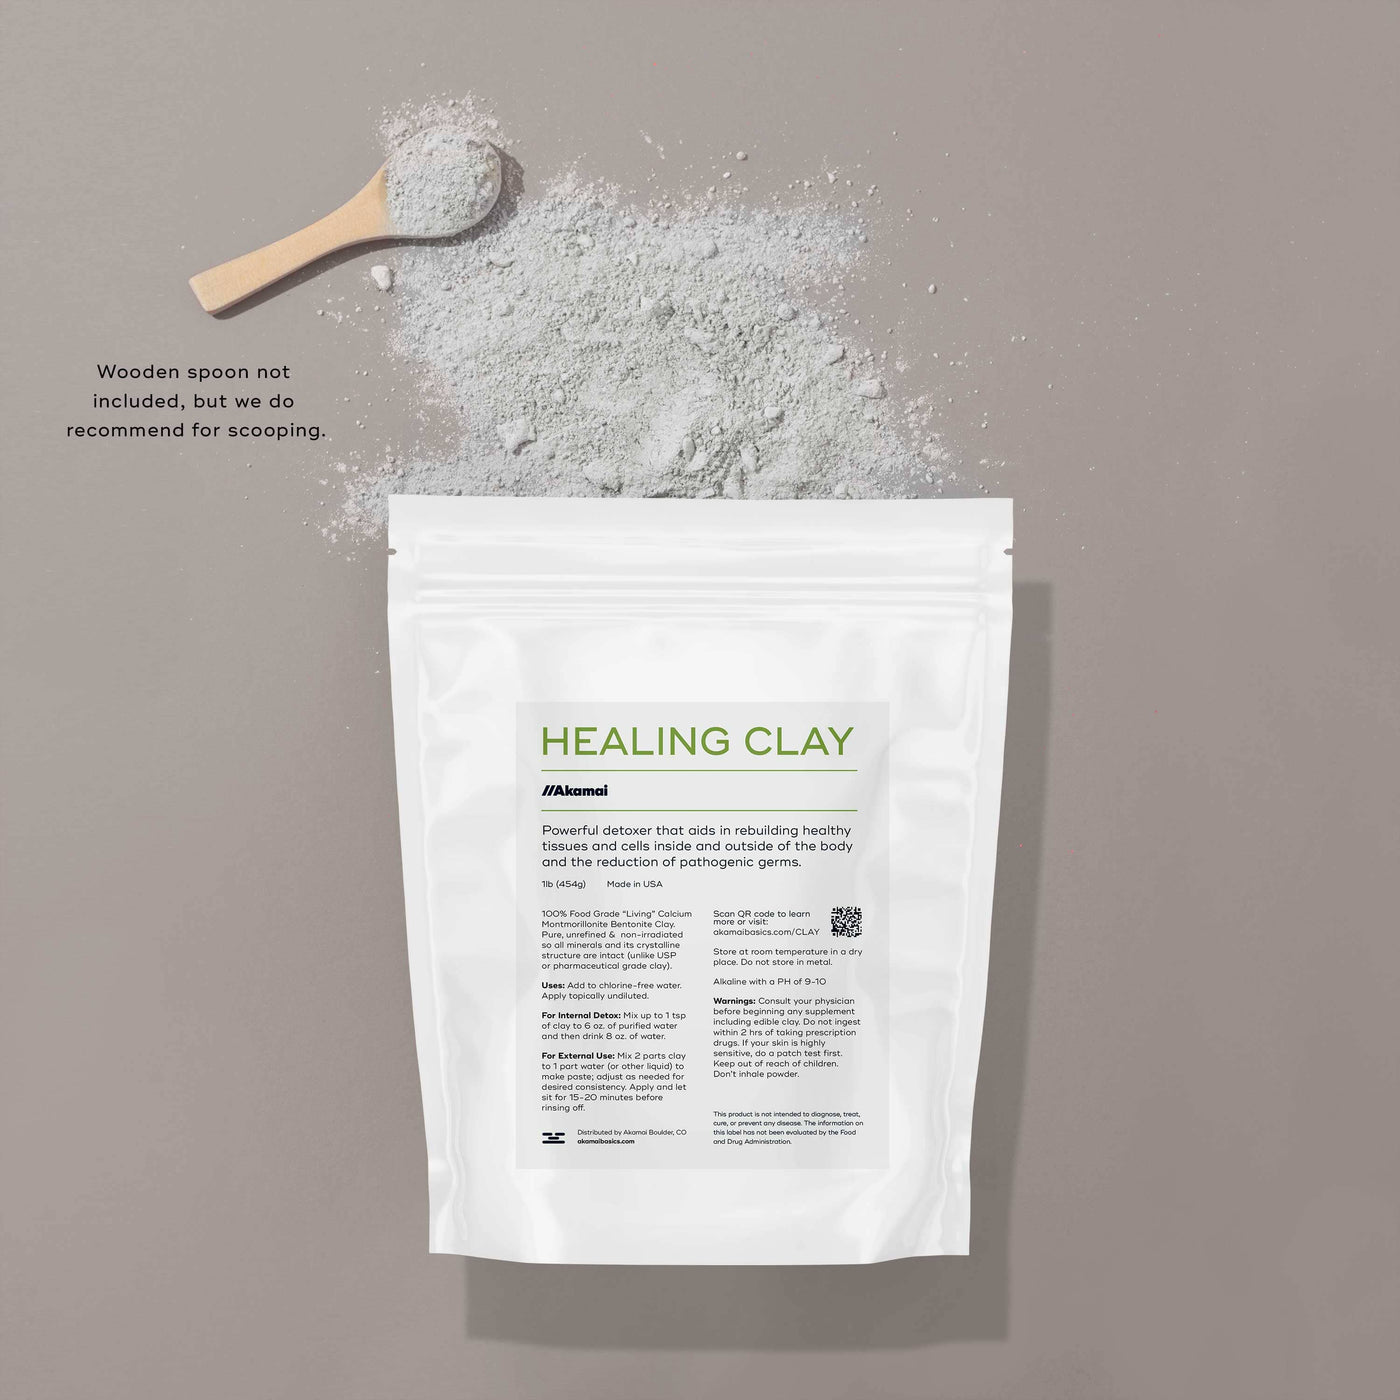 Food Safe Clay - What Clay to Use for Food and Drink